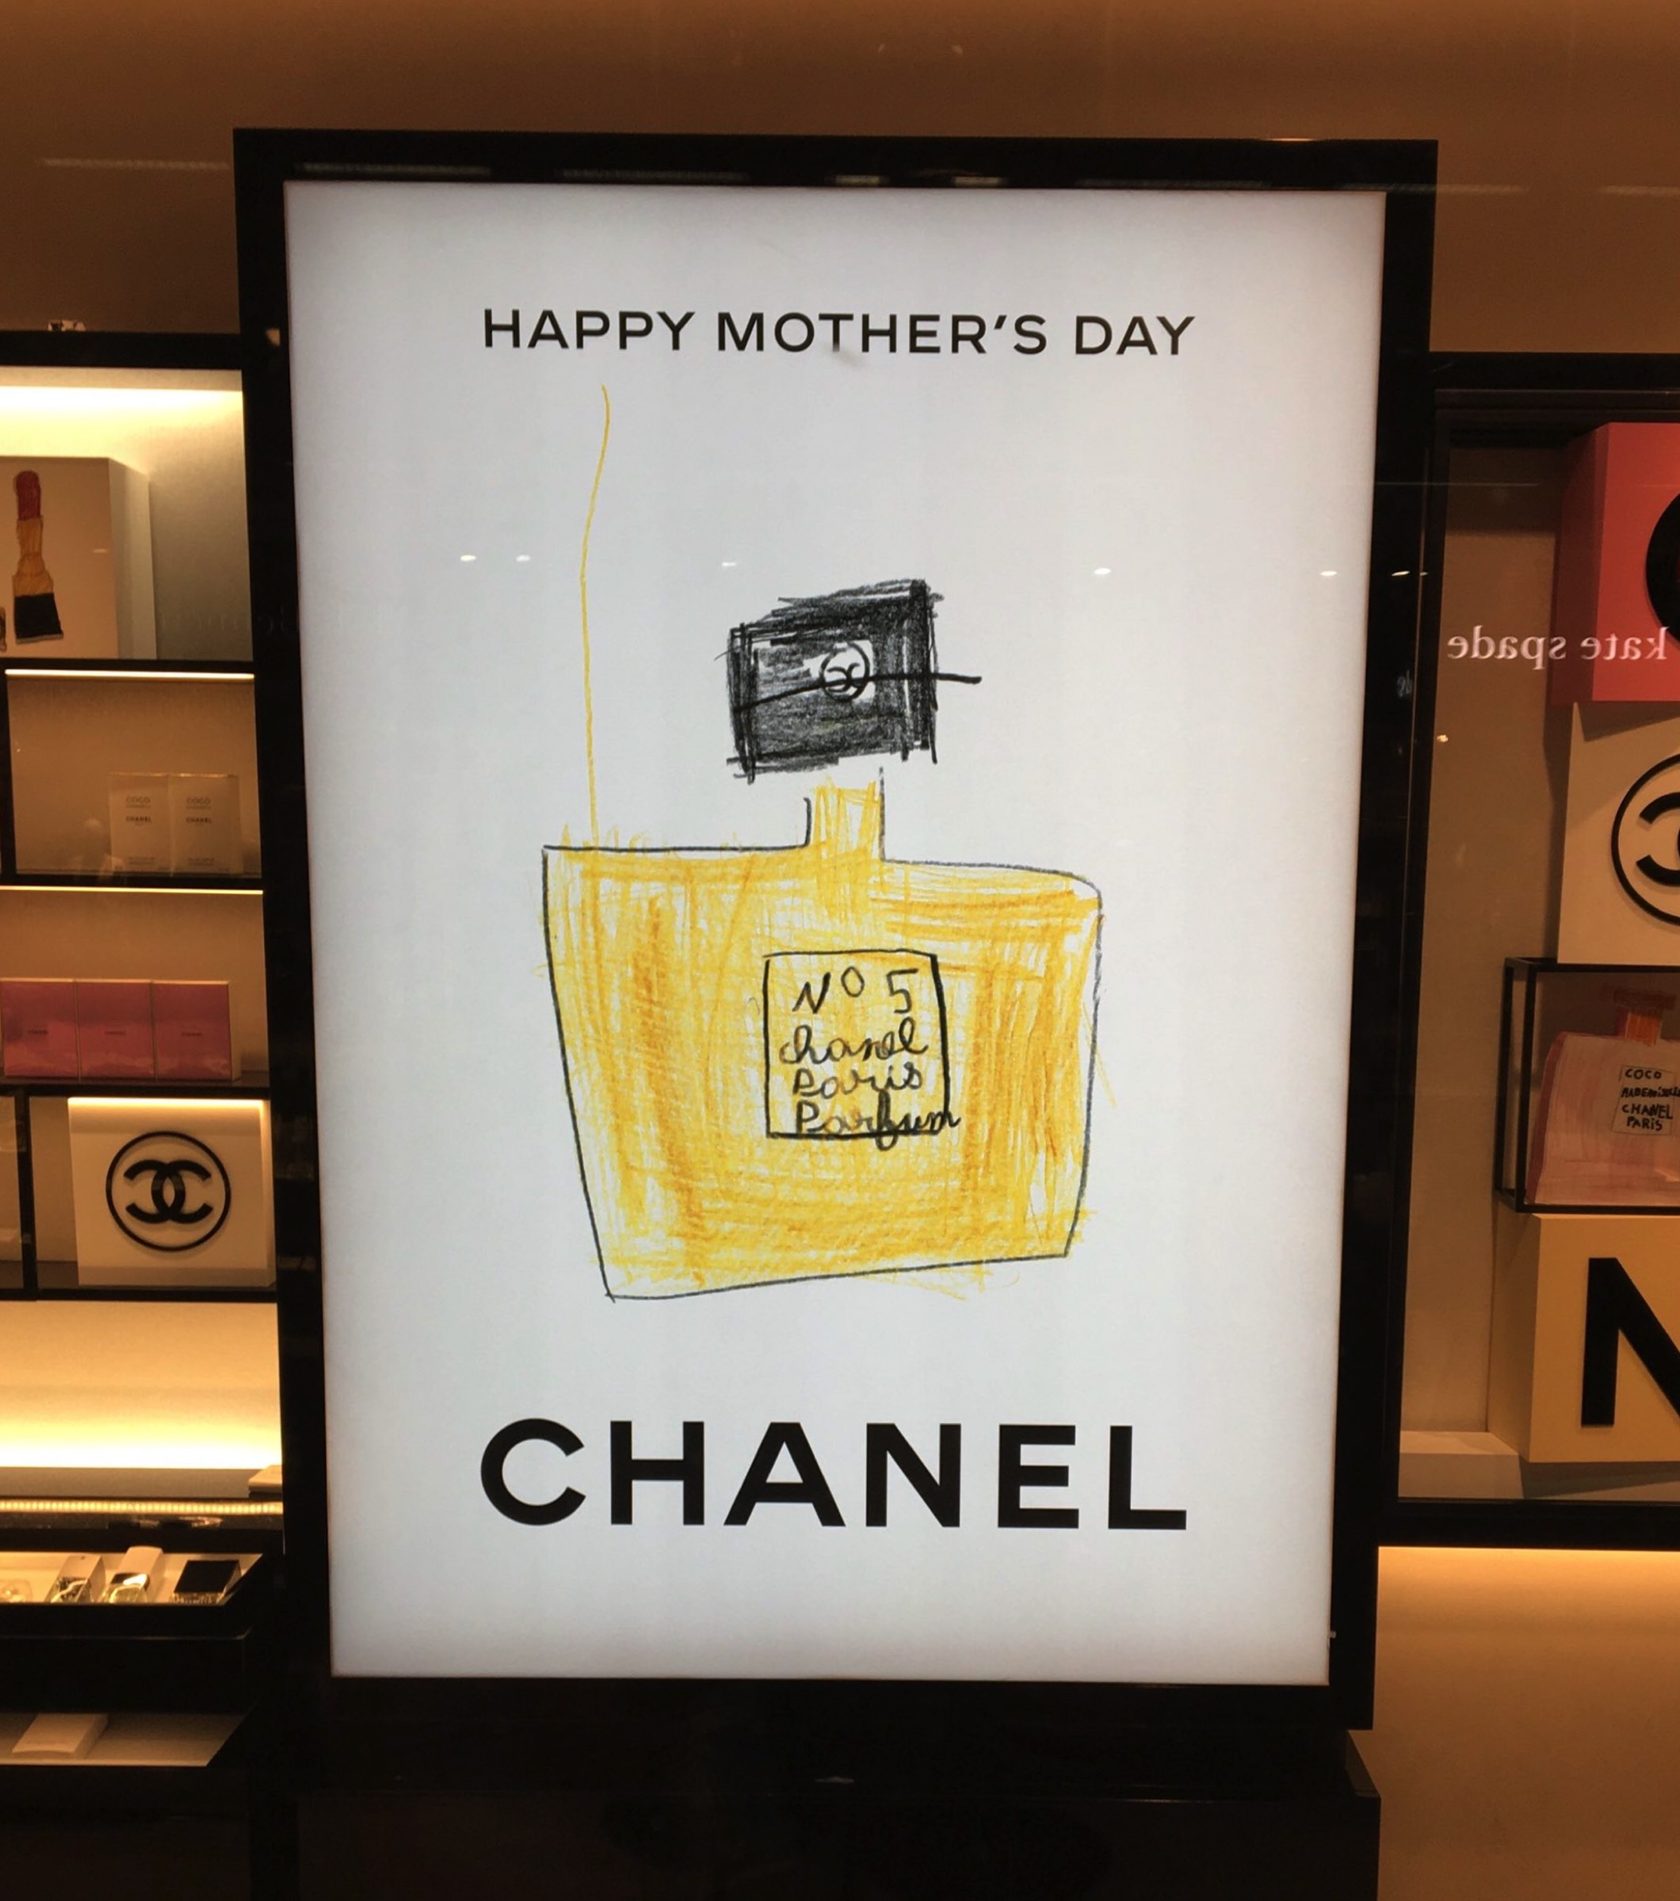 Chanel's campaign for mother's day - one of the best luxury brands campaign